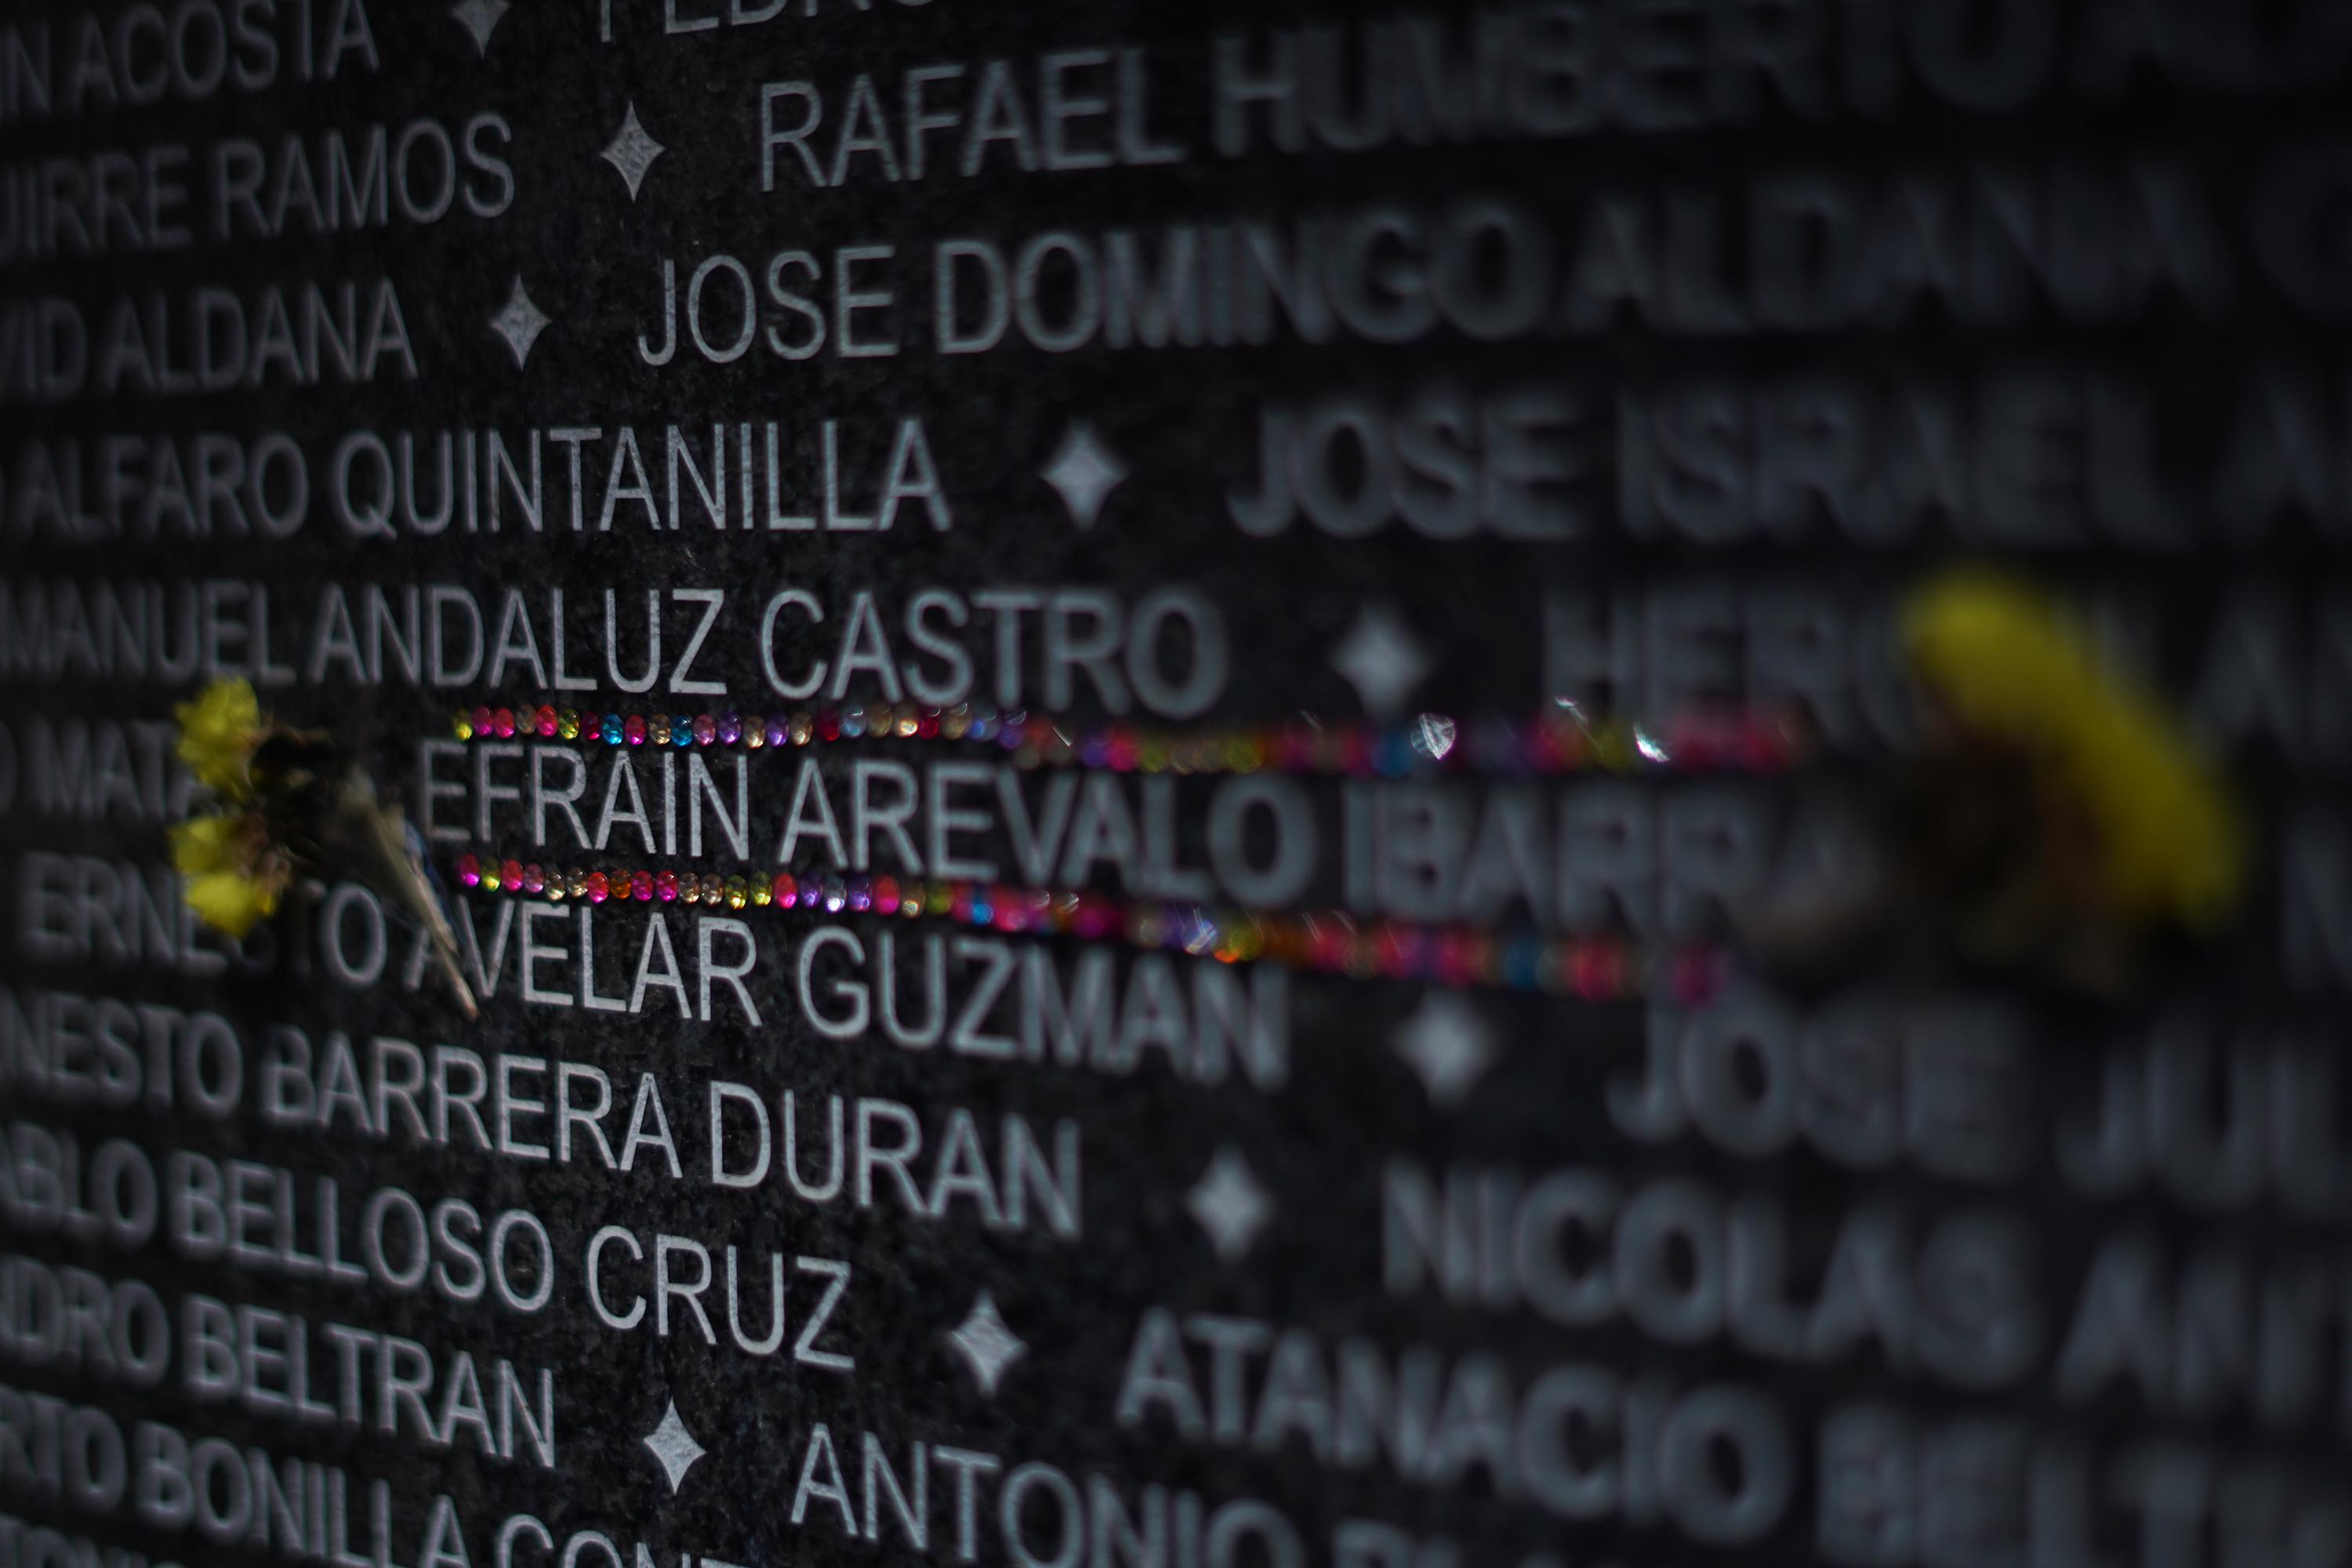 Efraín’s name is one of more than 600 others listed as “desaparecidos y desaparecidas” for the years 1970 to 1979 on the Monument to Memory and Truth in Cuscatlán Park — a fraction of the nearly 30,000 total victims memorialized. “This is an act of closure and healing for our hearts,” said Efraín Arévalo’s nephew, Roberto Castillo, speaking in front of the wall of names. In 1977, when Roberto was just eight years old, he accompanies his grandmother to the morgues and other places where authorities had reported deaths, to confirm whether any of the bodies were his uncle’s. Roberto says that he remembers how every day, his grandmother would sit in the doorway of her house waiting for Efraín to return. Originally, the family was from the municipality of Santa Elena, in the department of Usulután, where in 1981 the Salvadoran Army massacred more than 30 people.